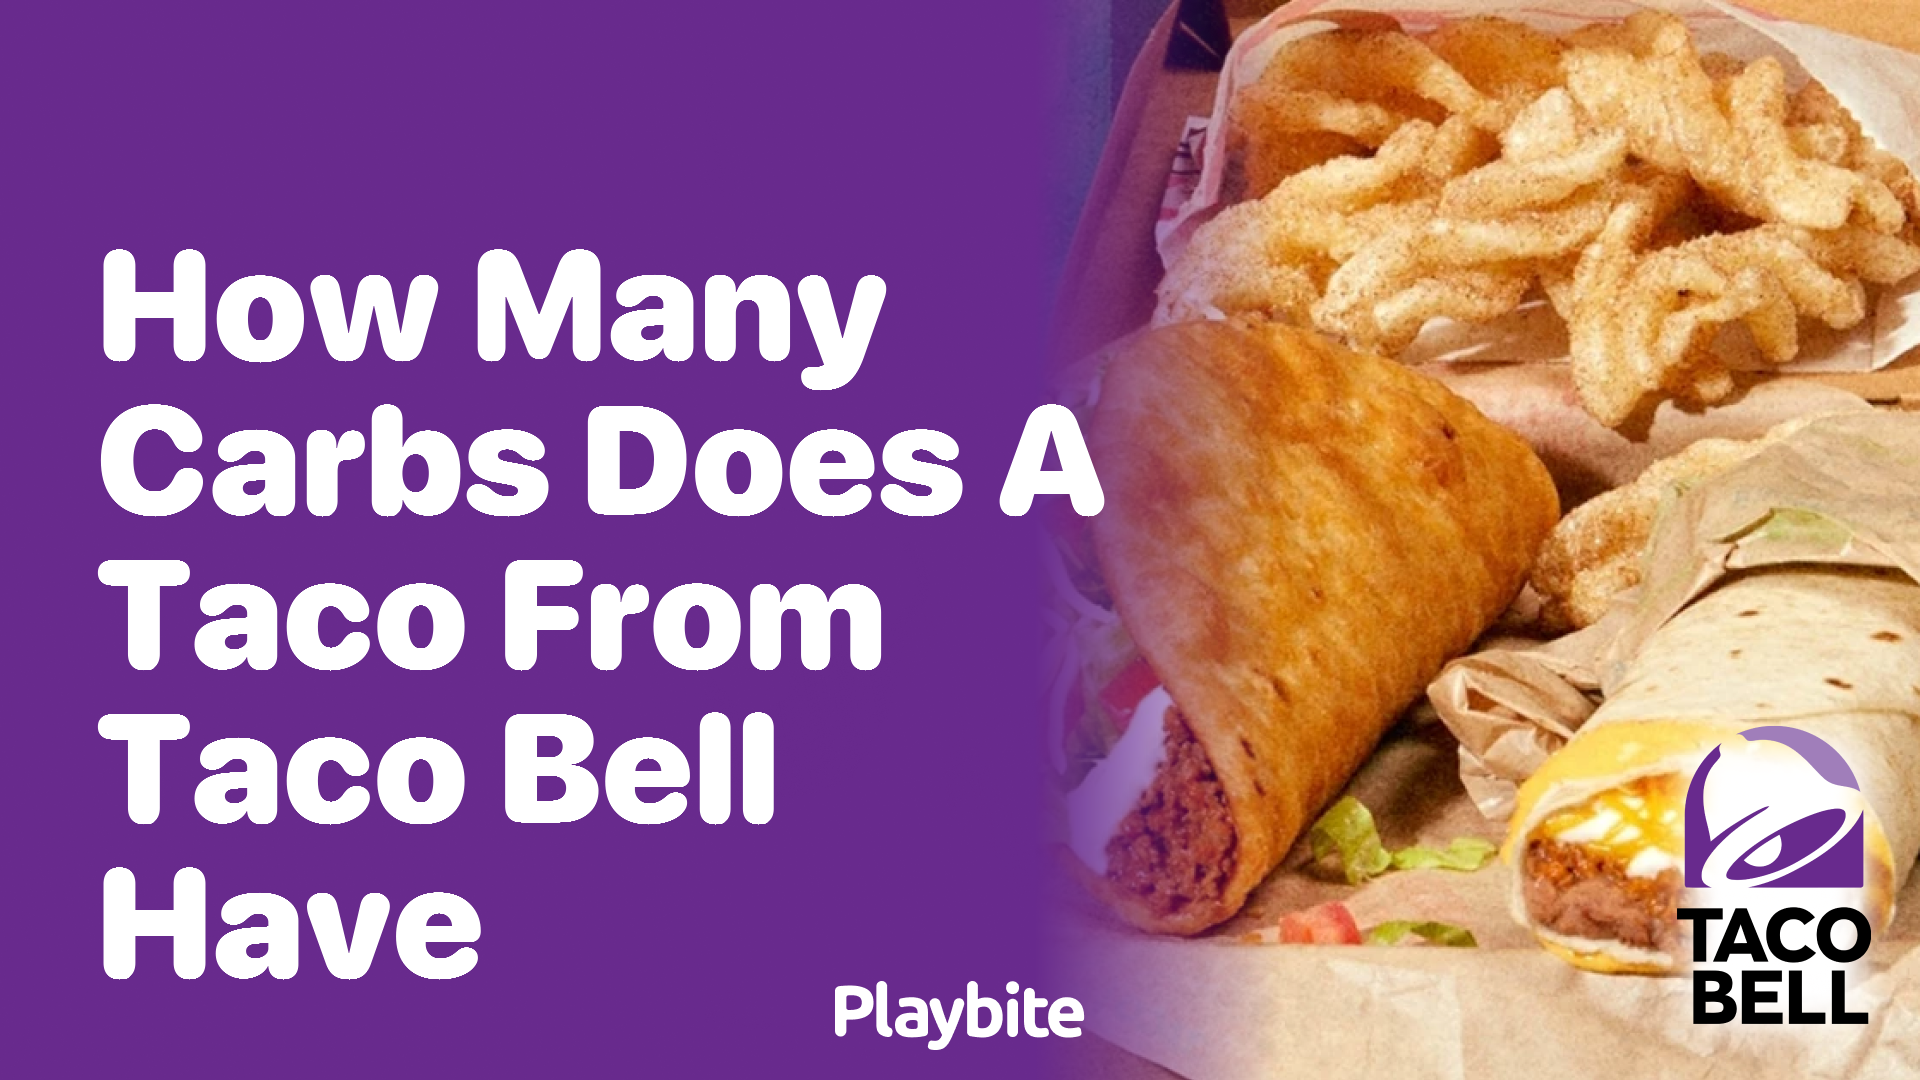 How Many Carbs Are in a Taco Bell Taco?